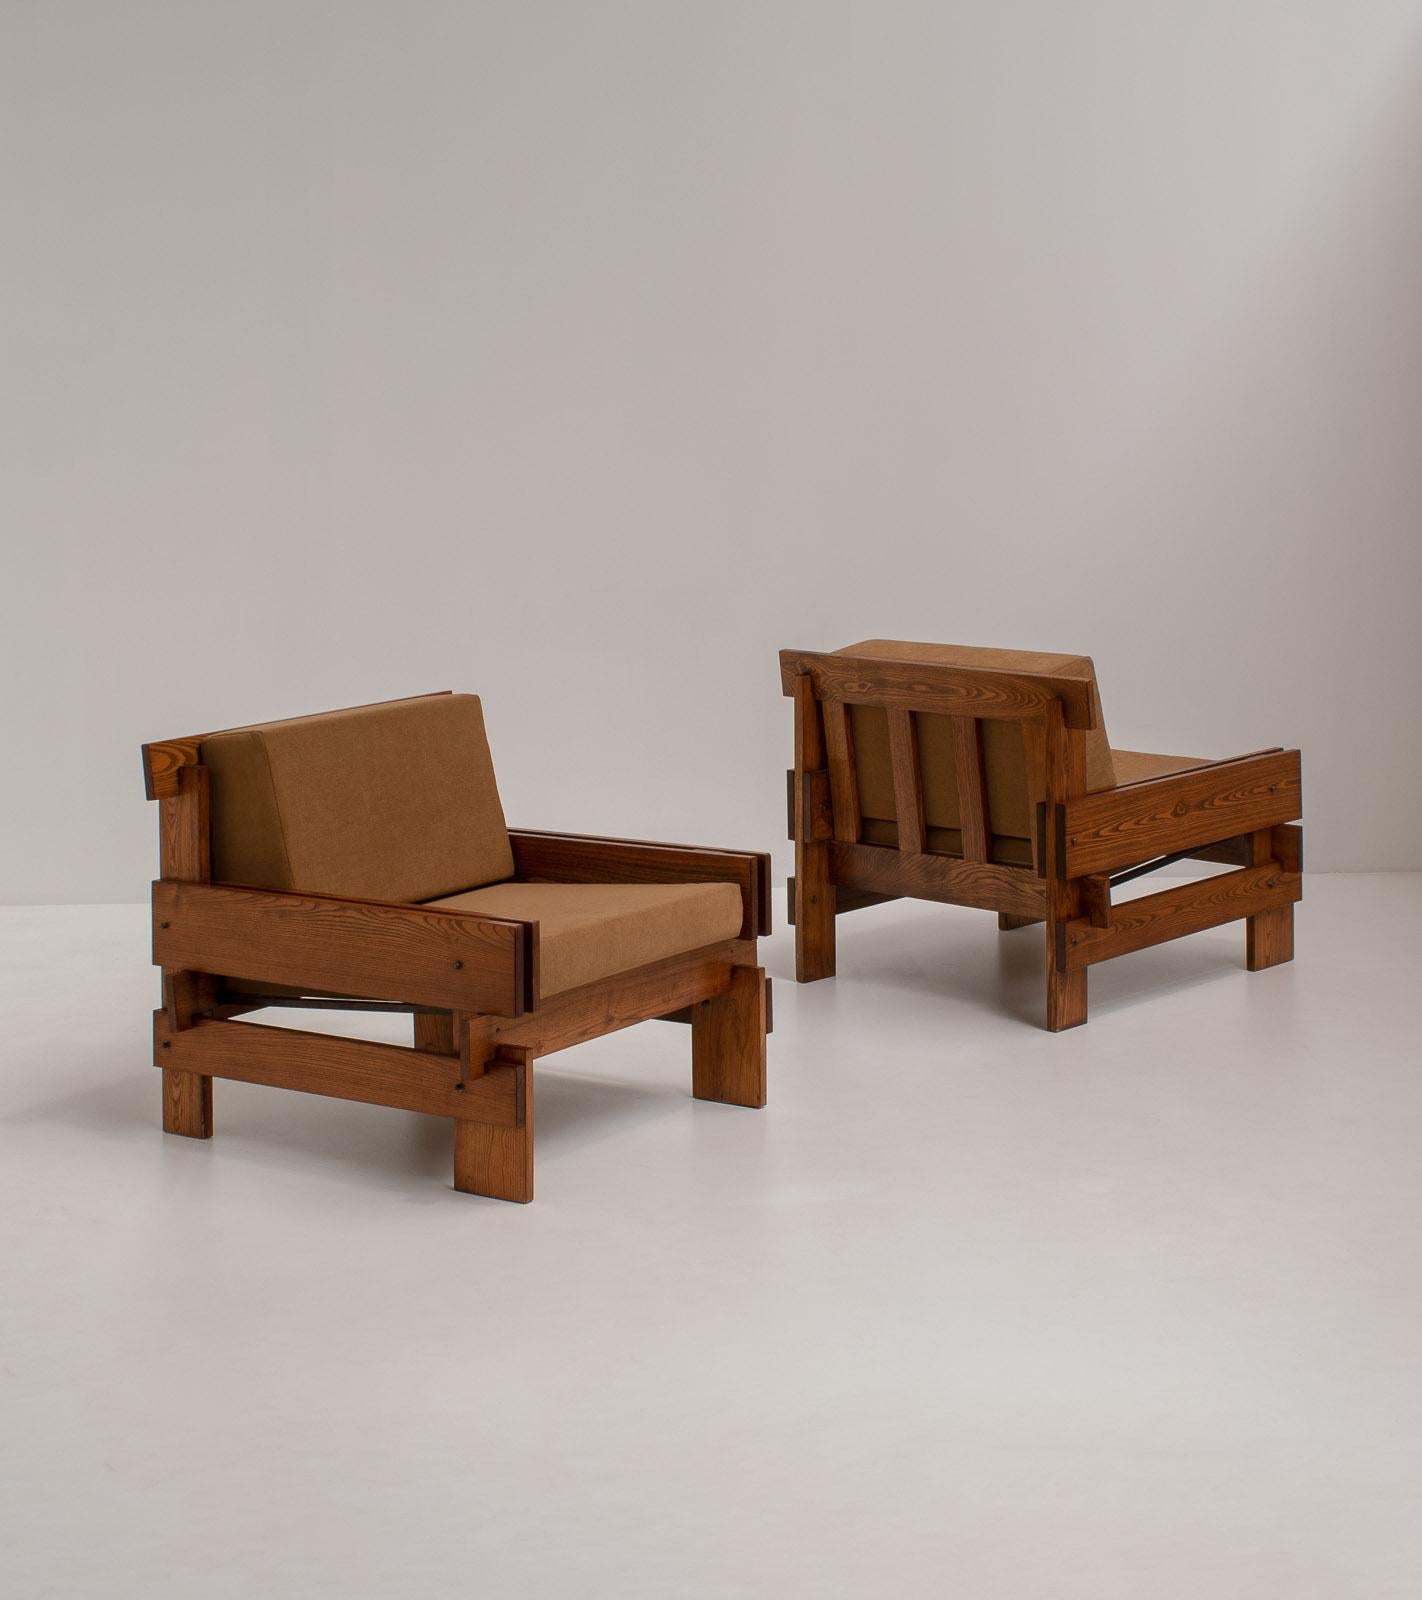 1970s Pair of French Lounge Chairs in Red Elm with Sculptural Architectural Design, Sourced from Southern France.

The wooden frame steals the show. These armchairs are the perfect eye-catcher in any room and they rarely get more interesting than